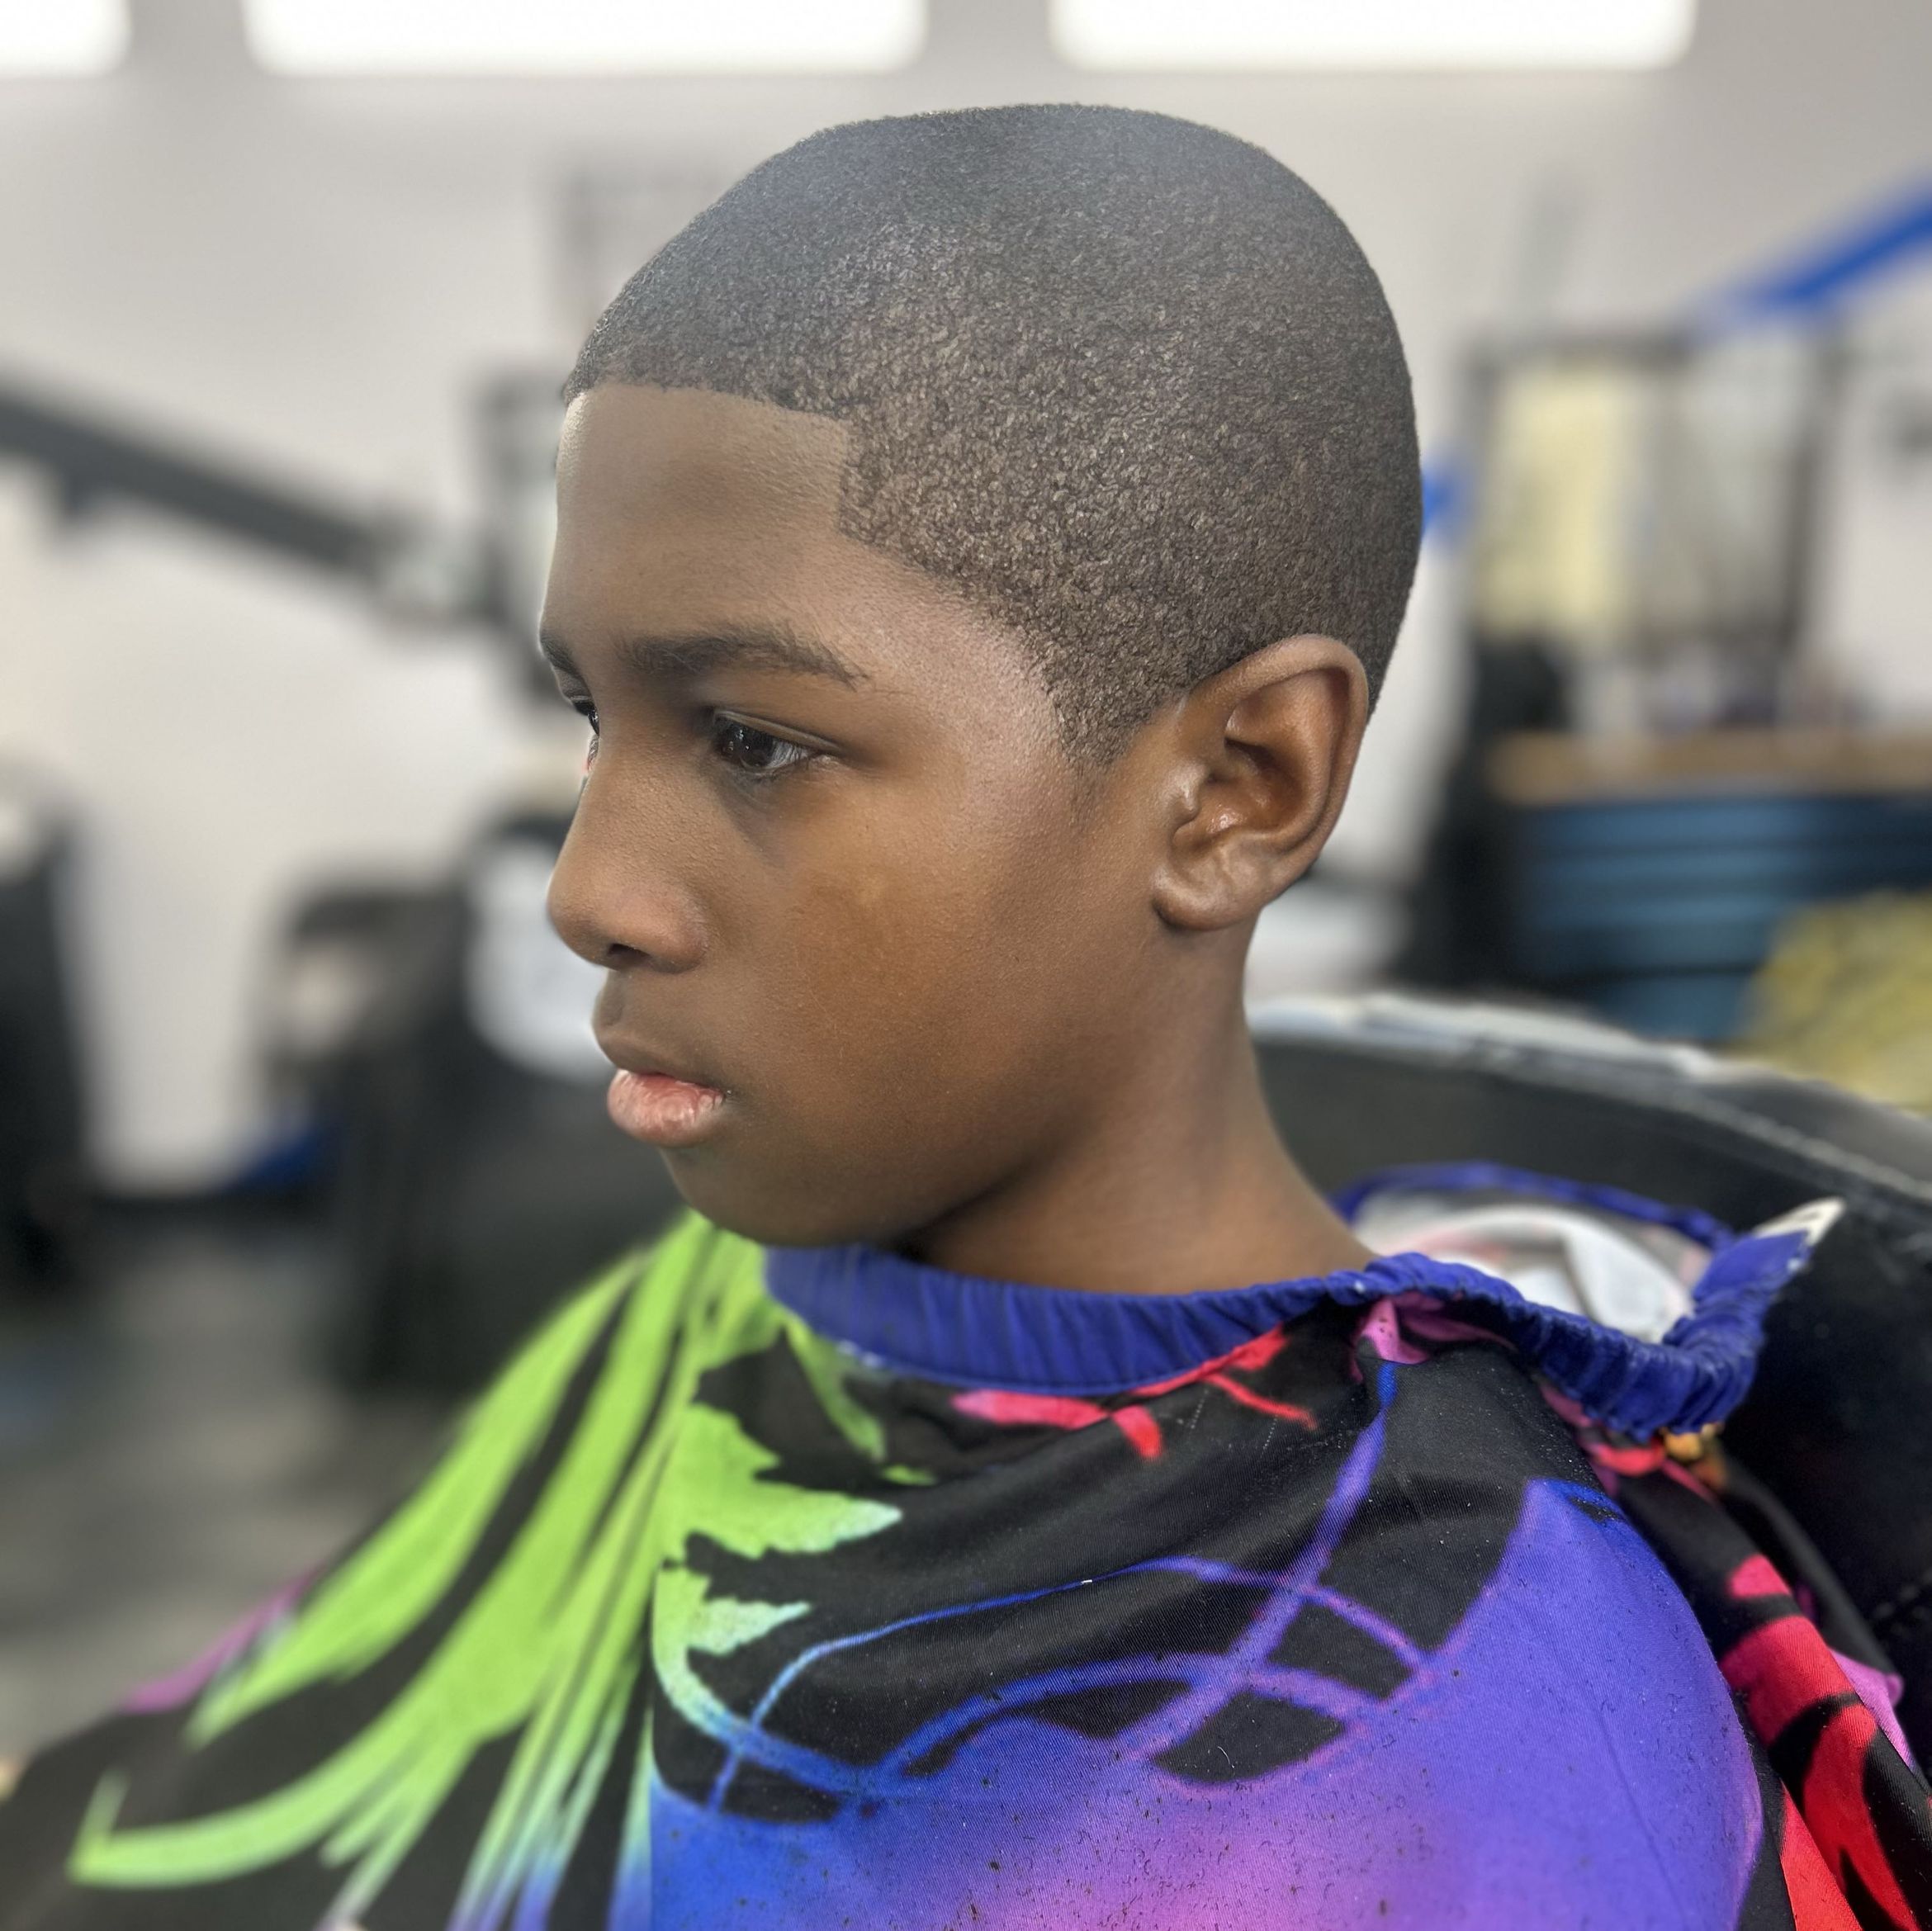 All Kid Cuts 12 yrs old or younger portfolio